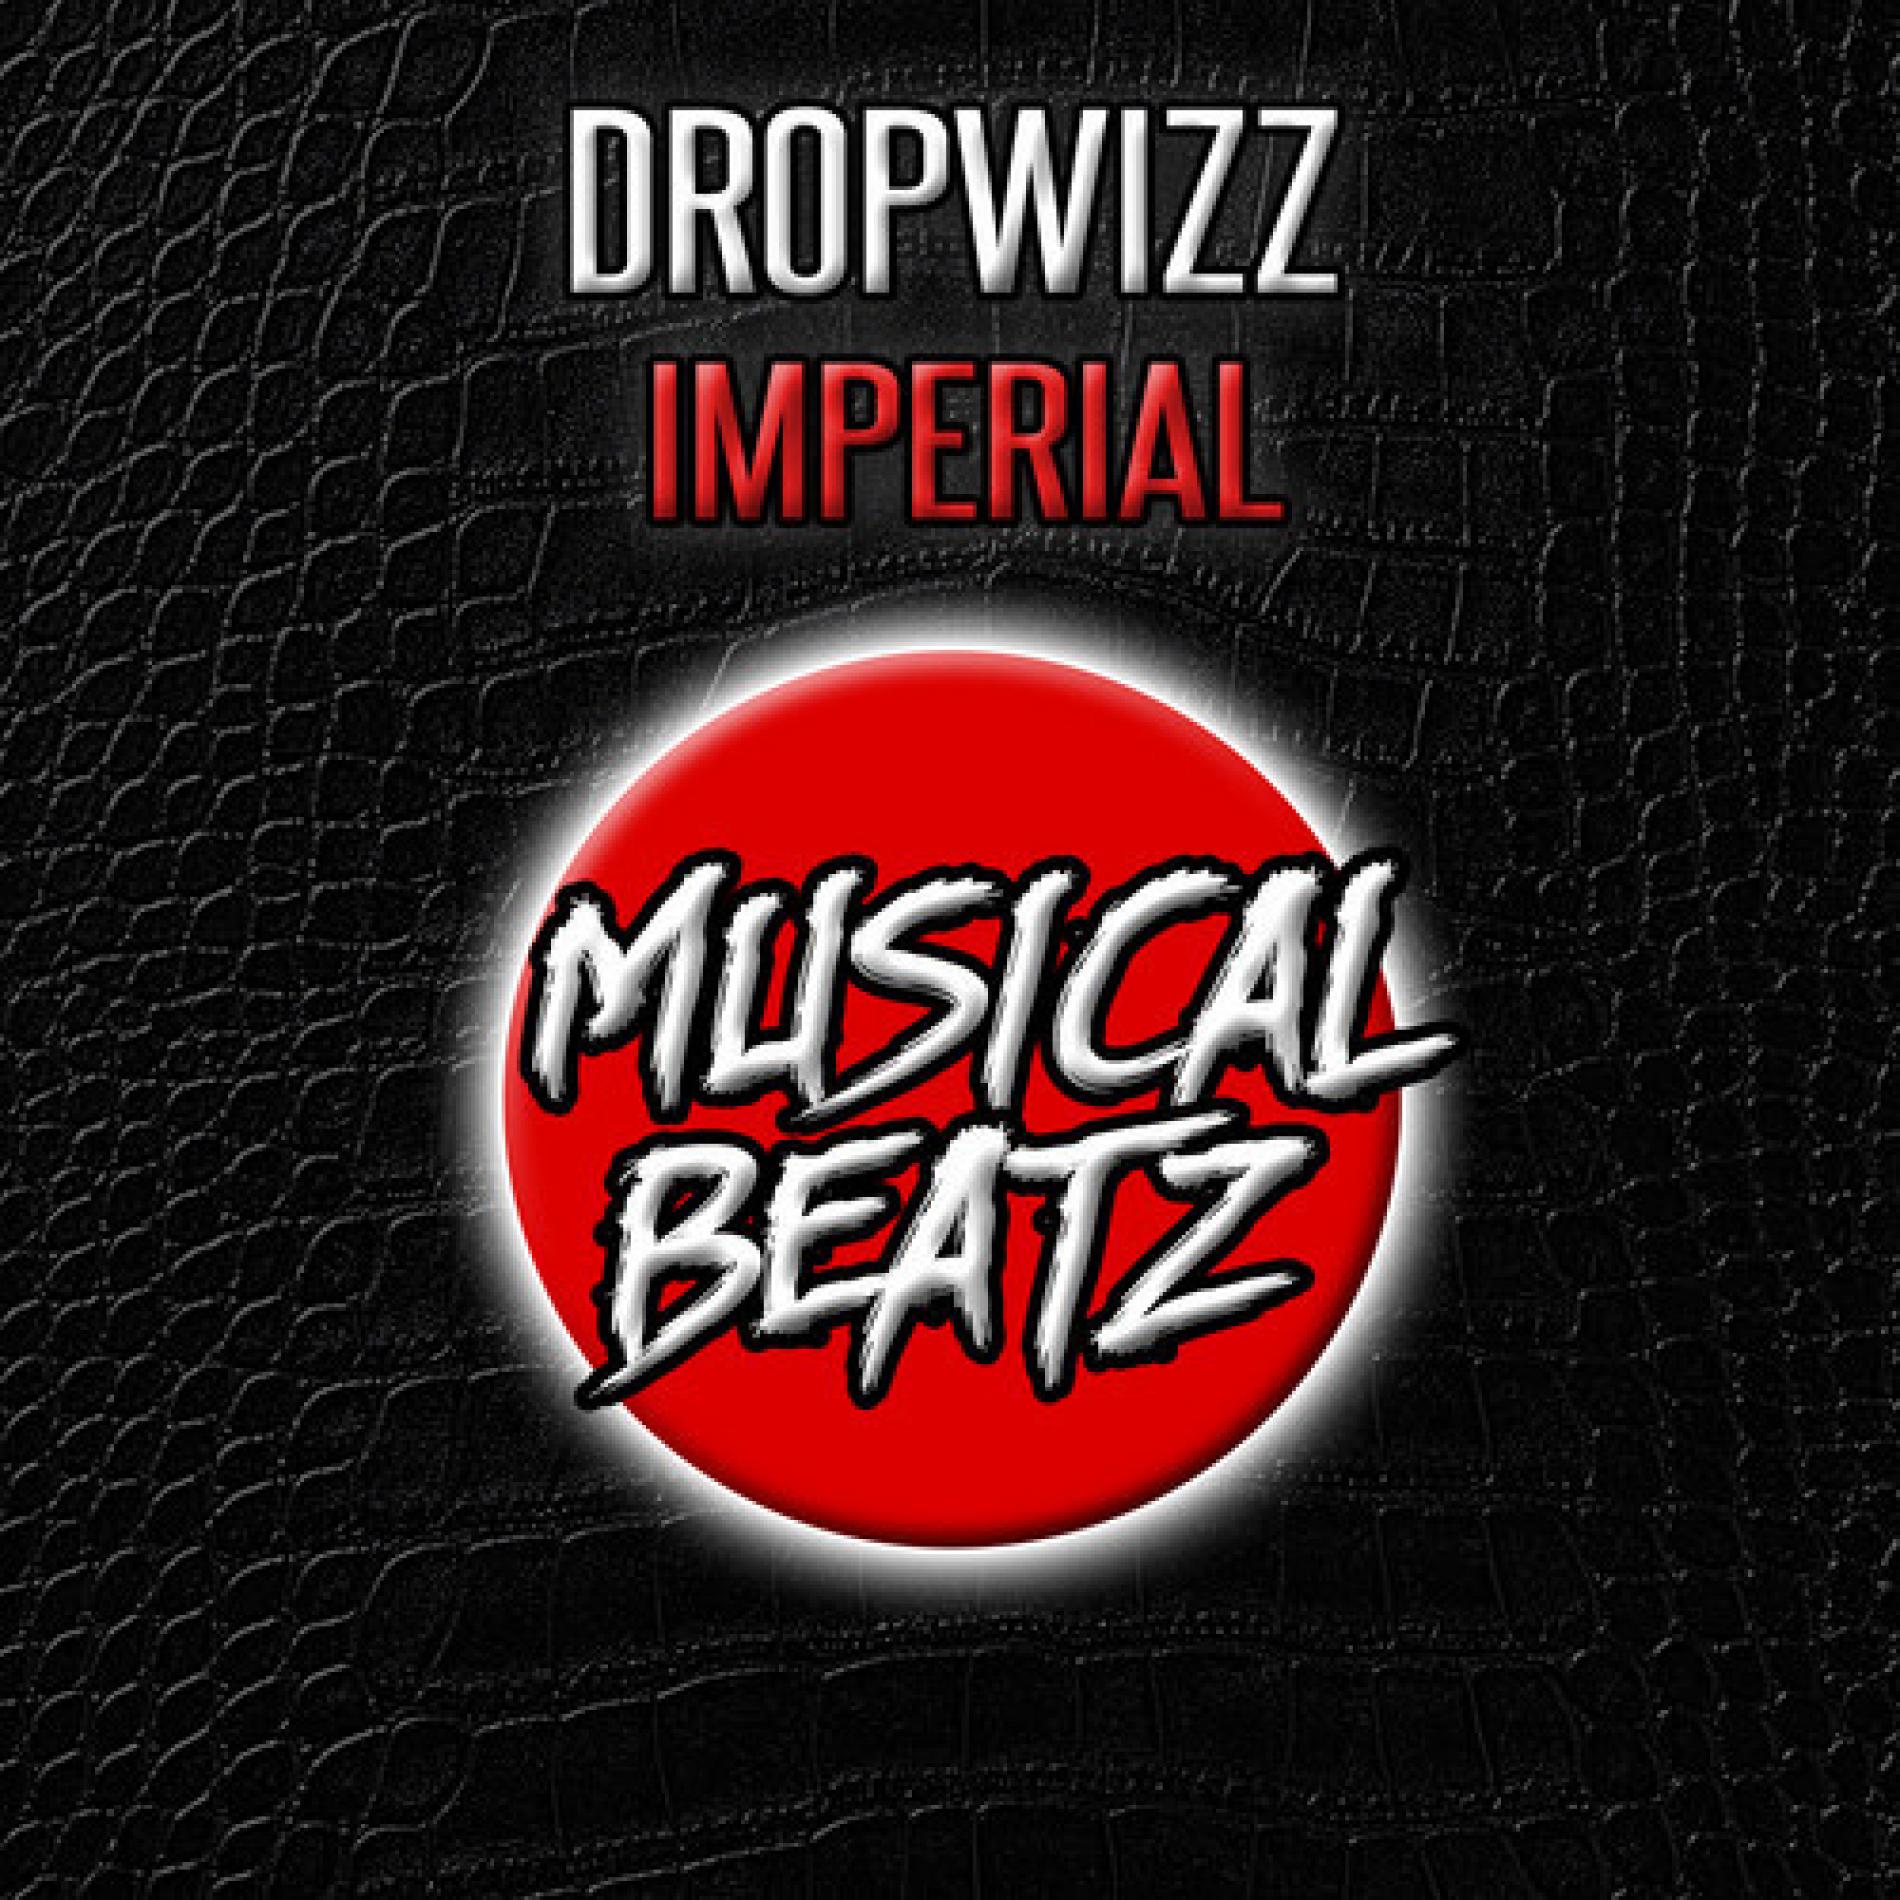 Dropwizz’s Imperial – Now Out